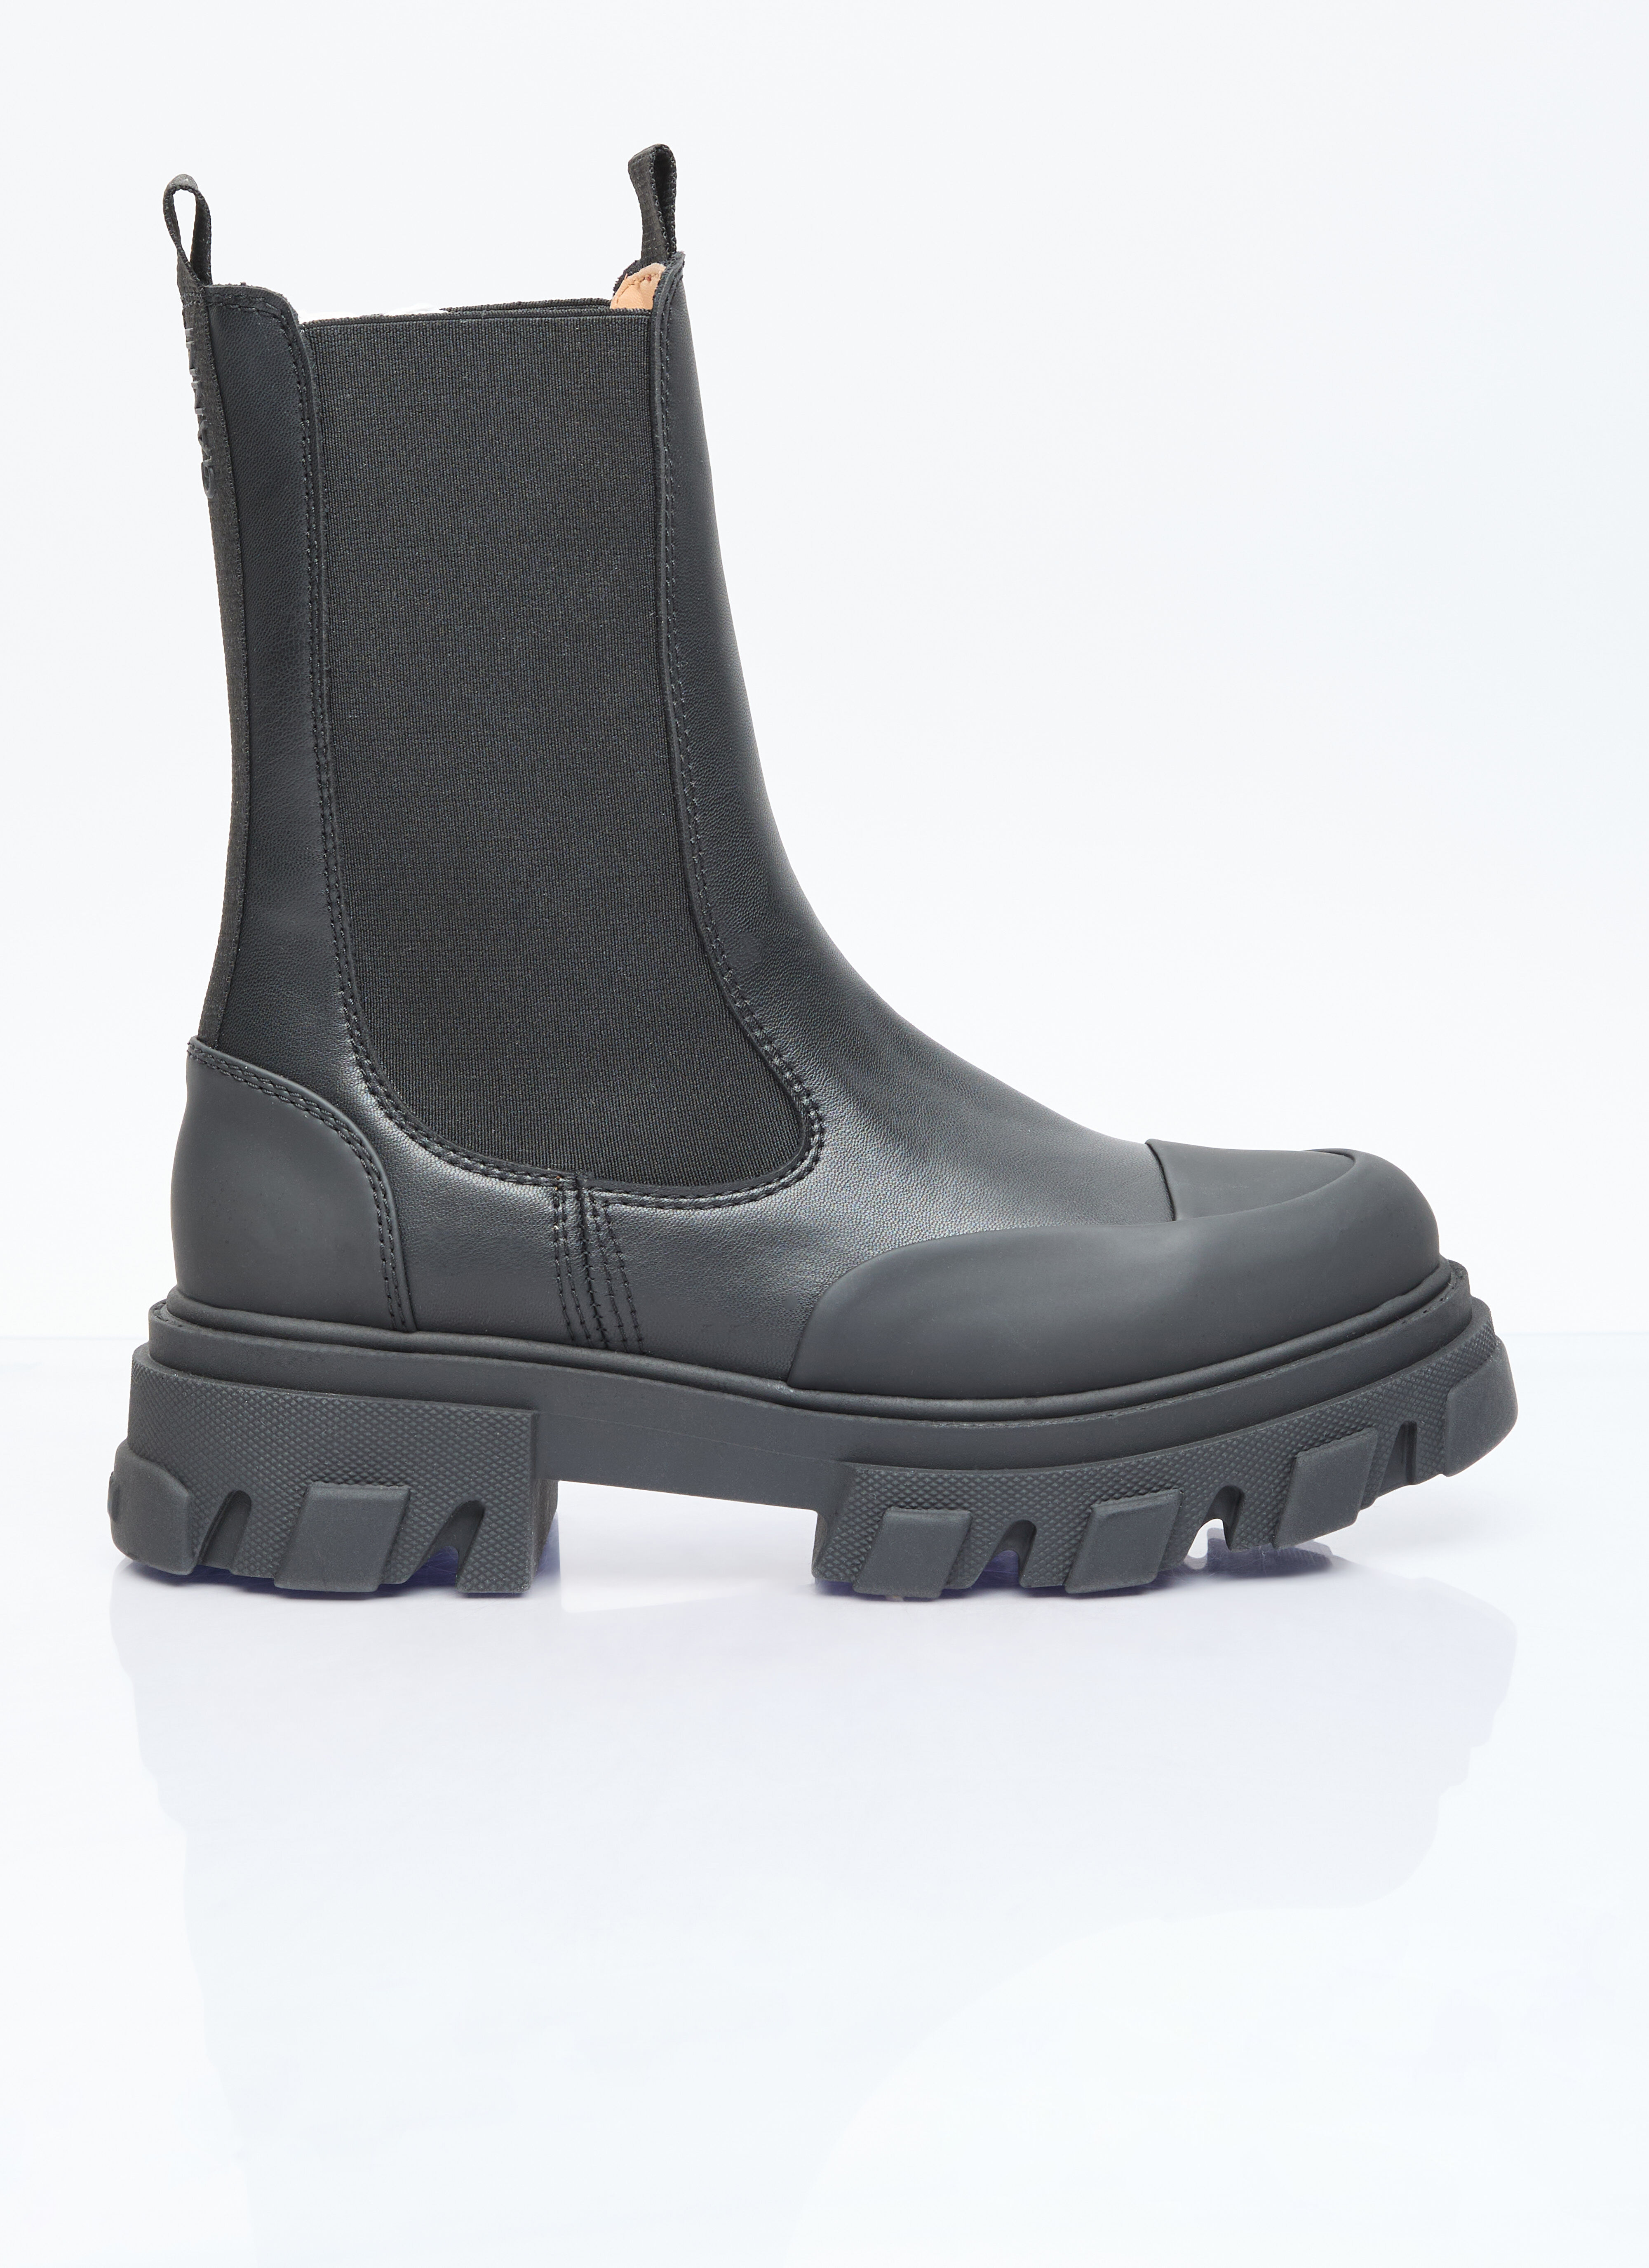 Diesel Cleated Mid Chelsea Boots Black dsl0355006